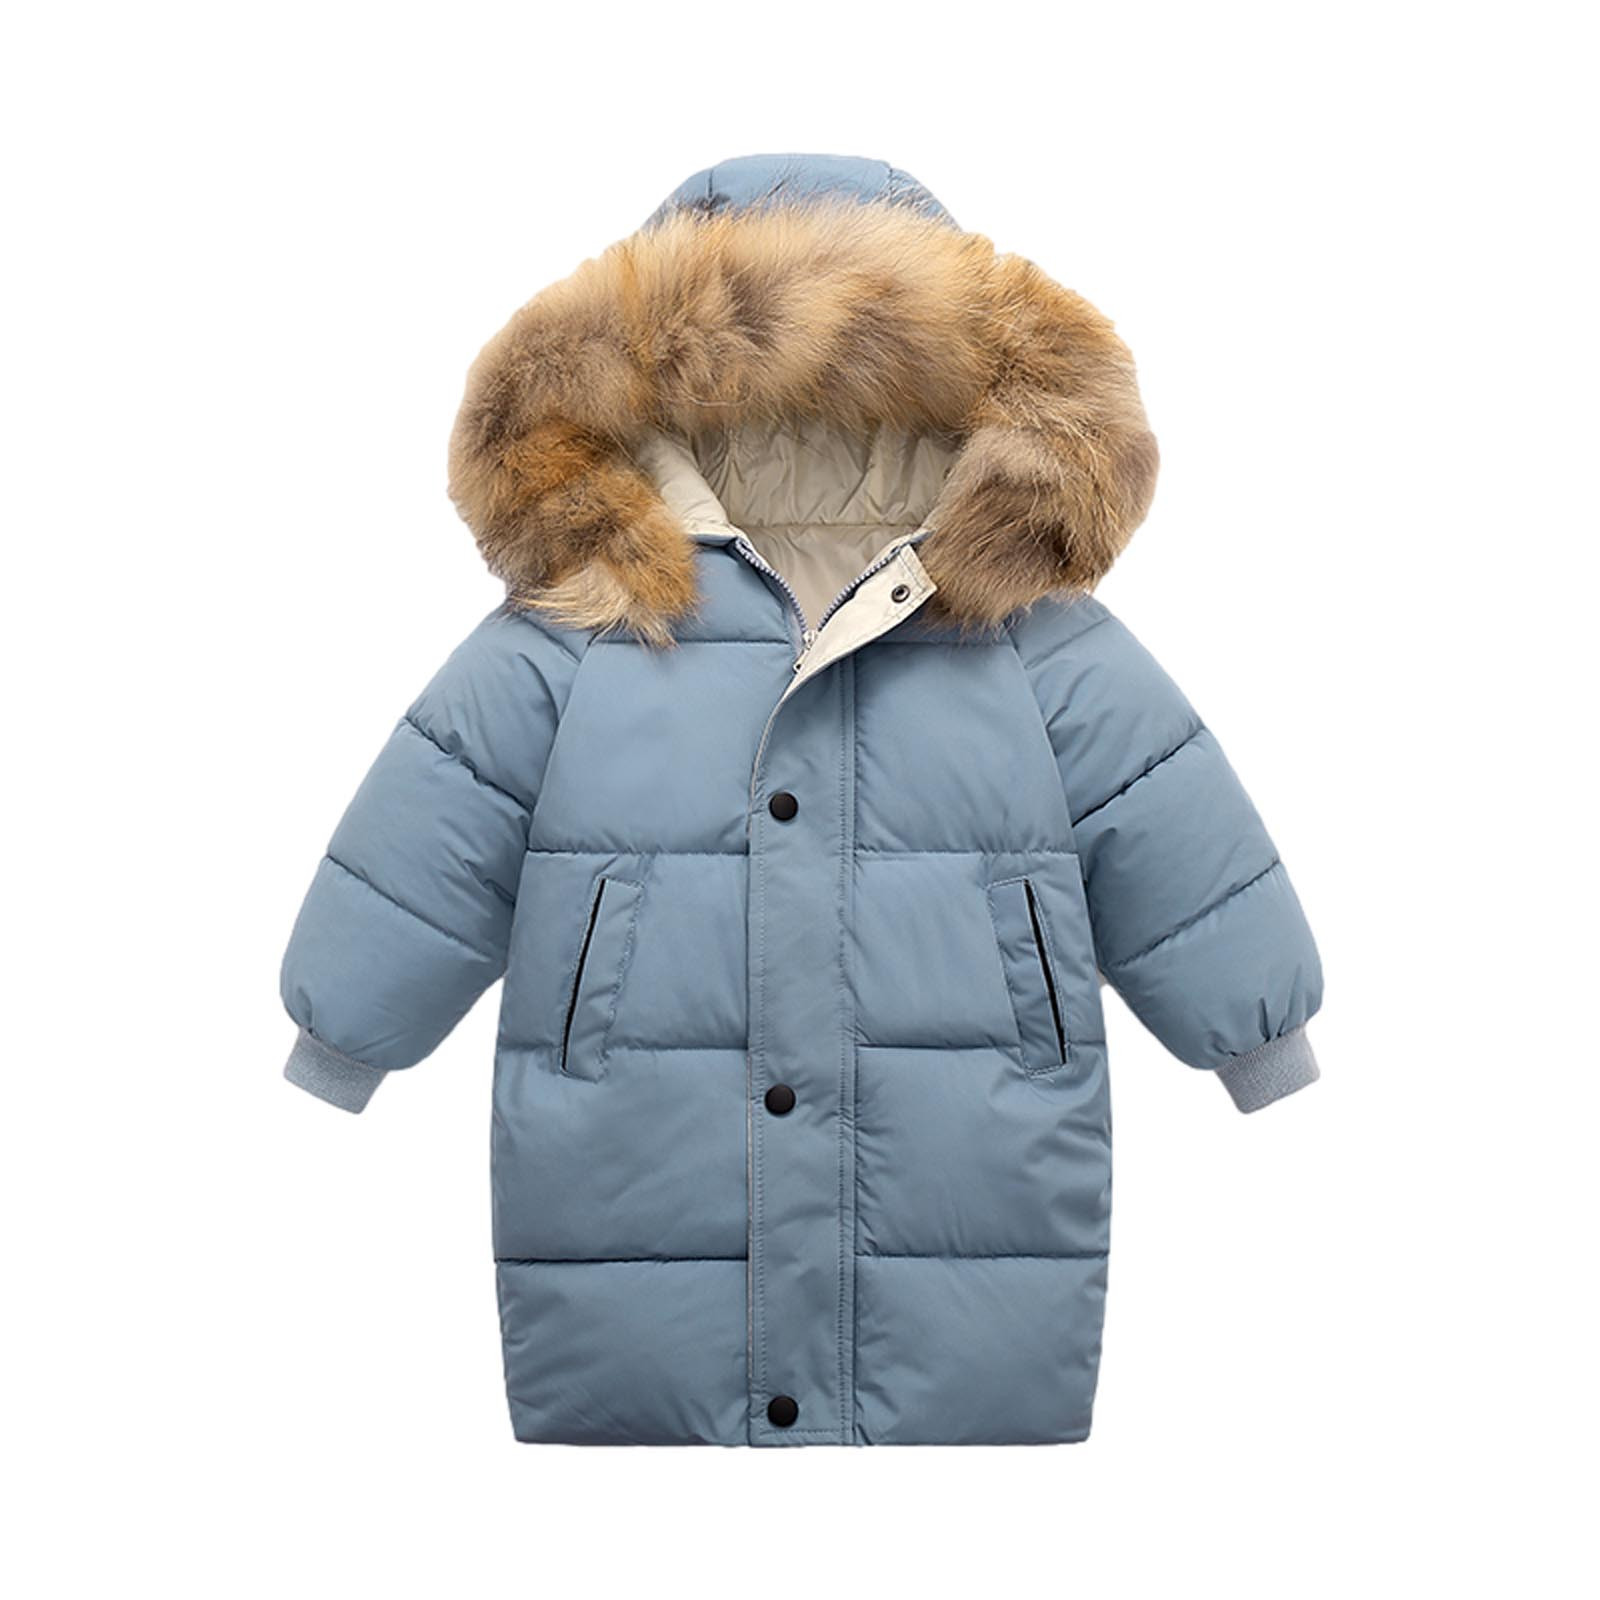 Verugu Toddler Baby Girls Boys Winter Coat Thicken Warm Jackets Baby Hooded Snow Outwear Coat Kids Thicken Warm Down Coat Winter Hooded Long Cotton Down Jackets Outerwears Blue, 4-5 Years - image 1 of 3